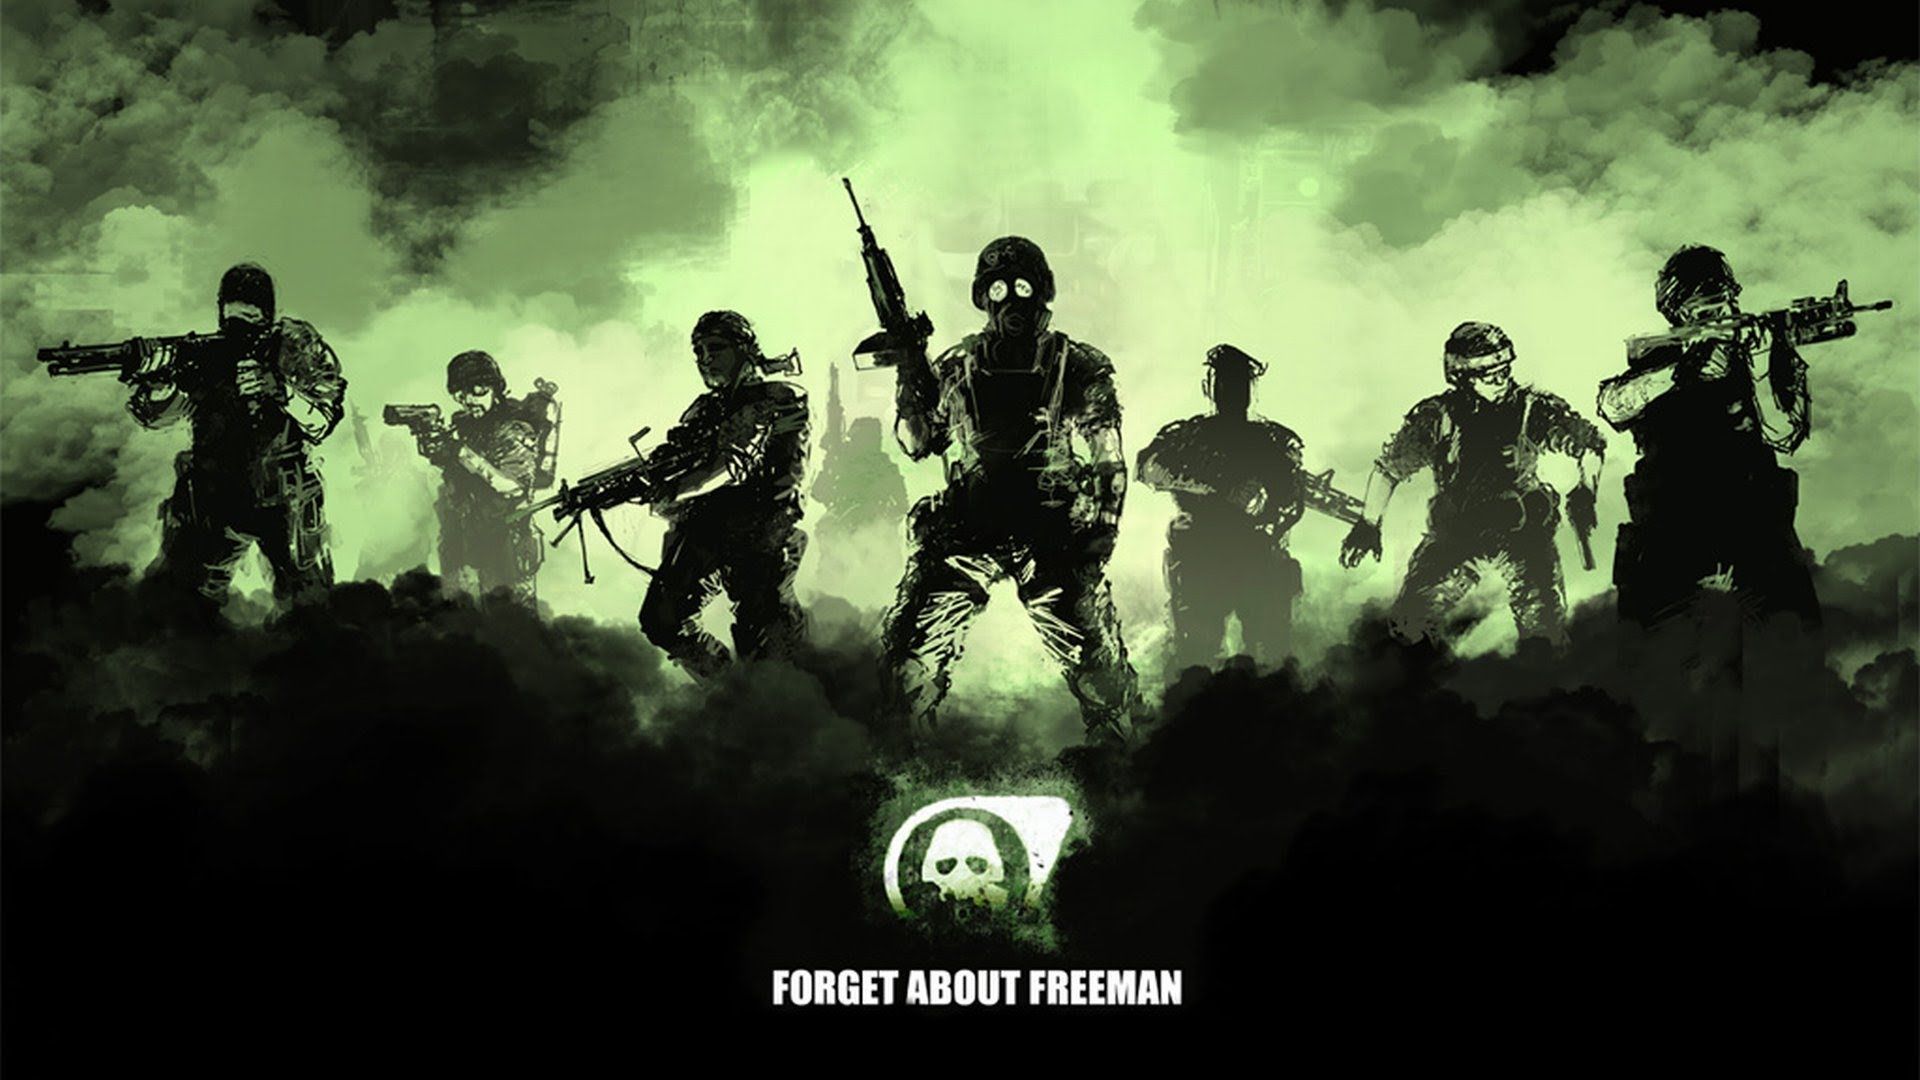 Forget About Freeman. Army wallpaper, Military wallpaper, Picture